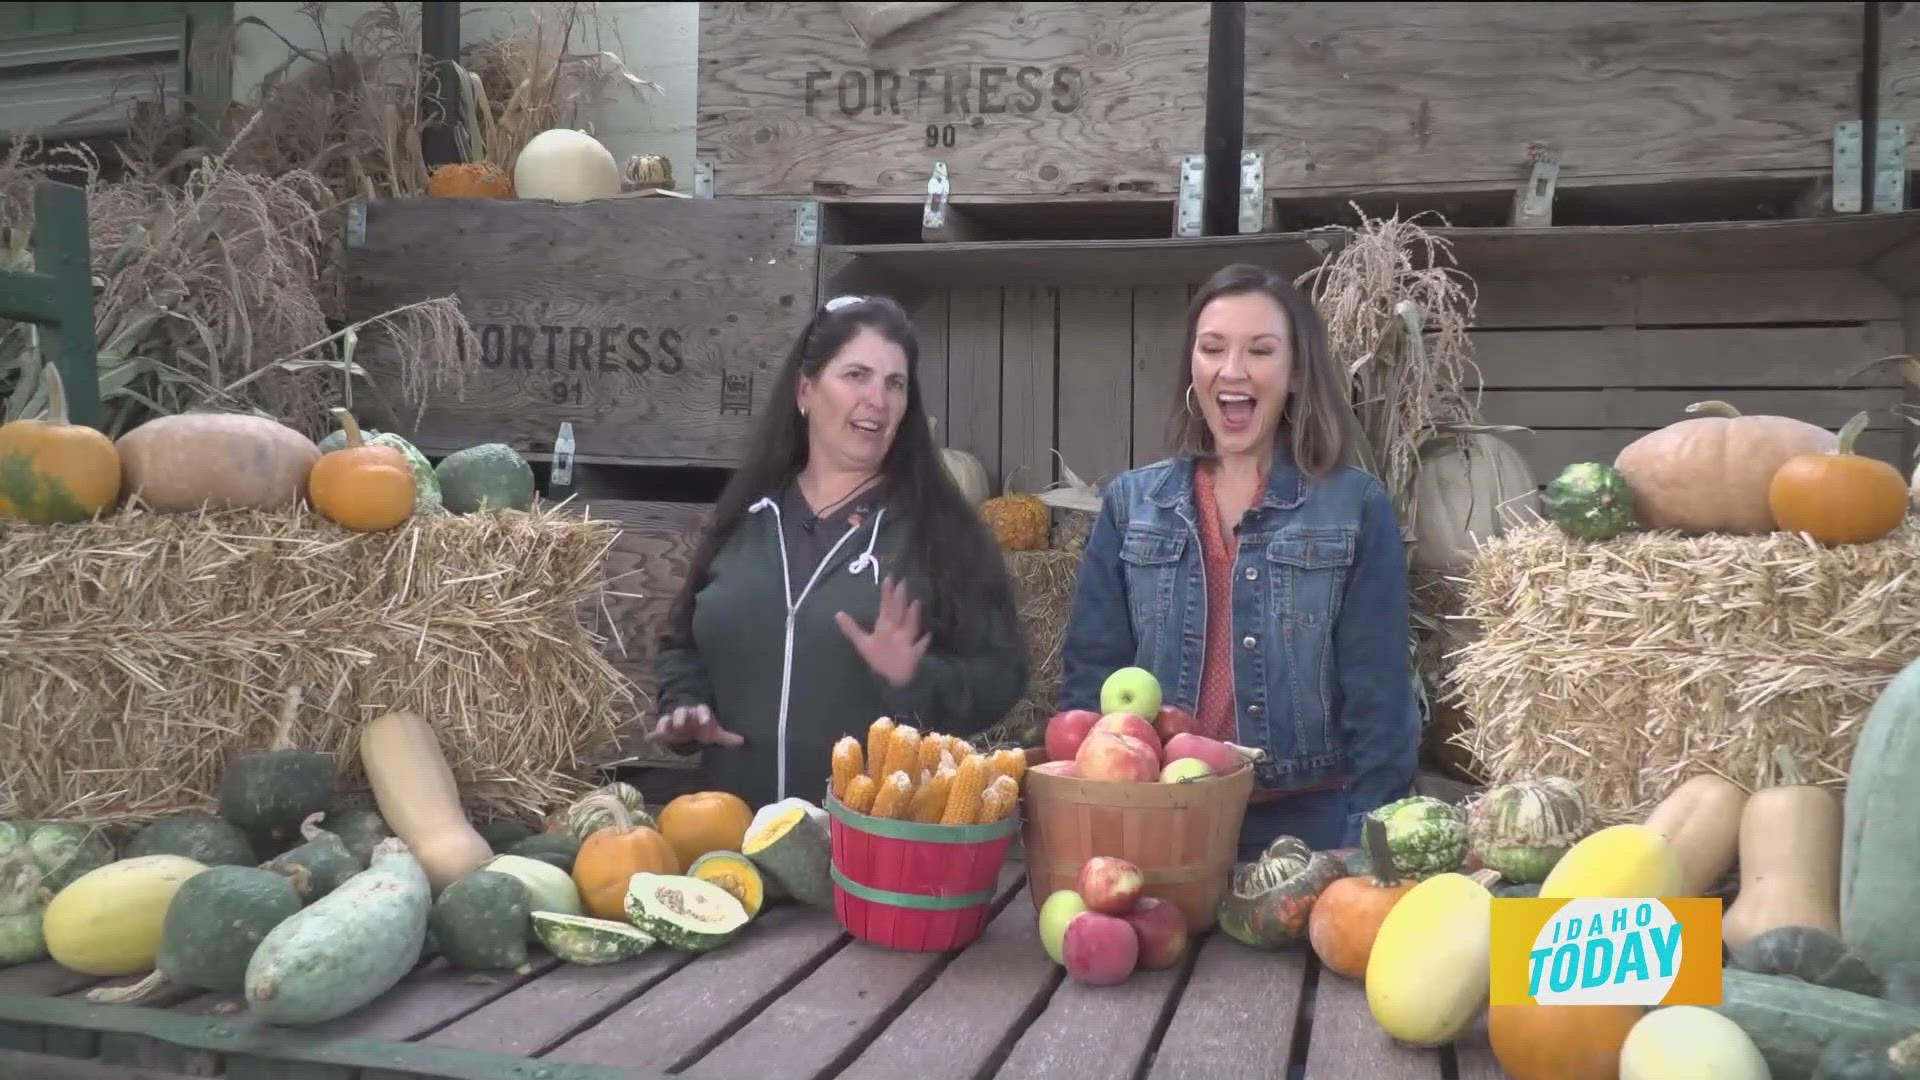 Agriculture expert, Gina, visits with Idaho Today’s Mellisa Paul about using gourds, pumpkins, corn and squash as home decorations that double as meals weeks later!